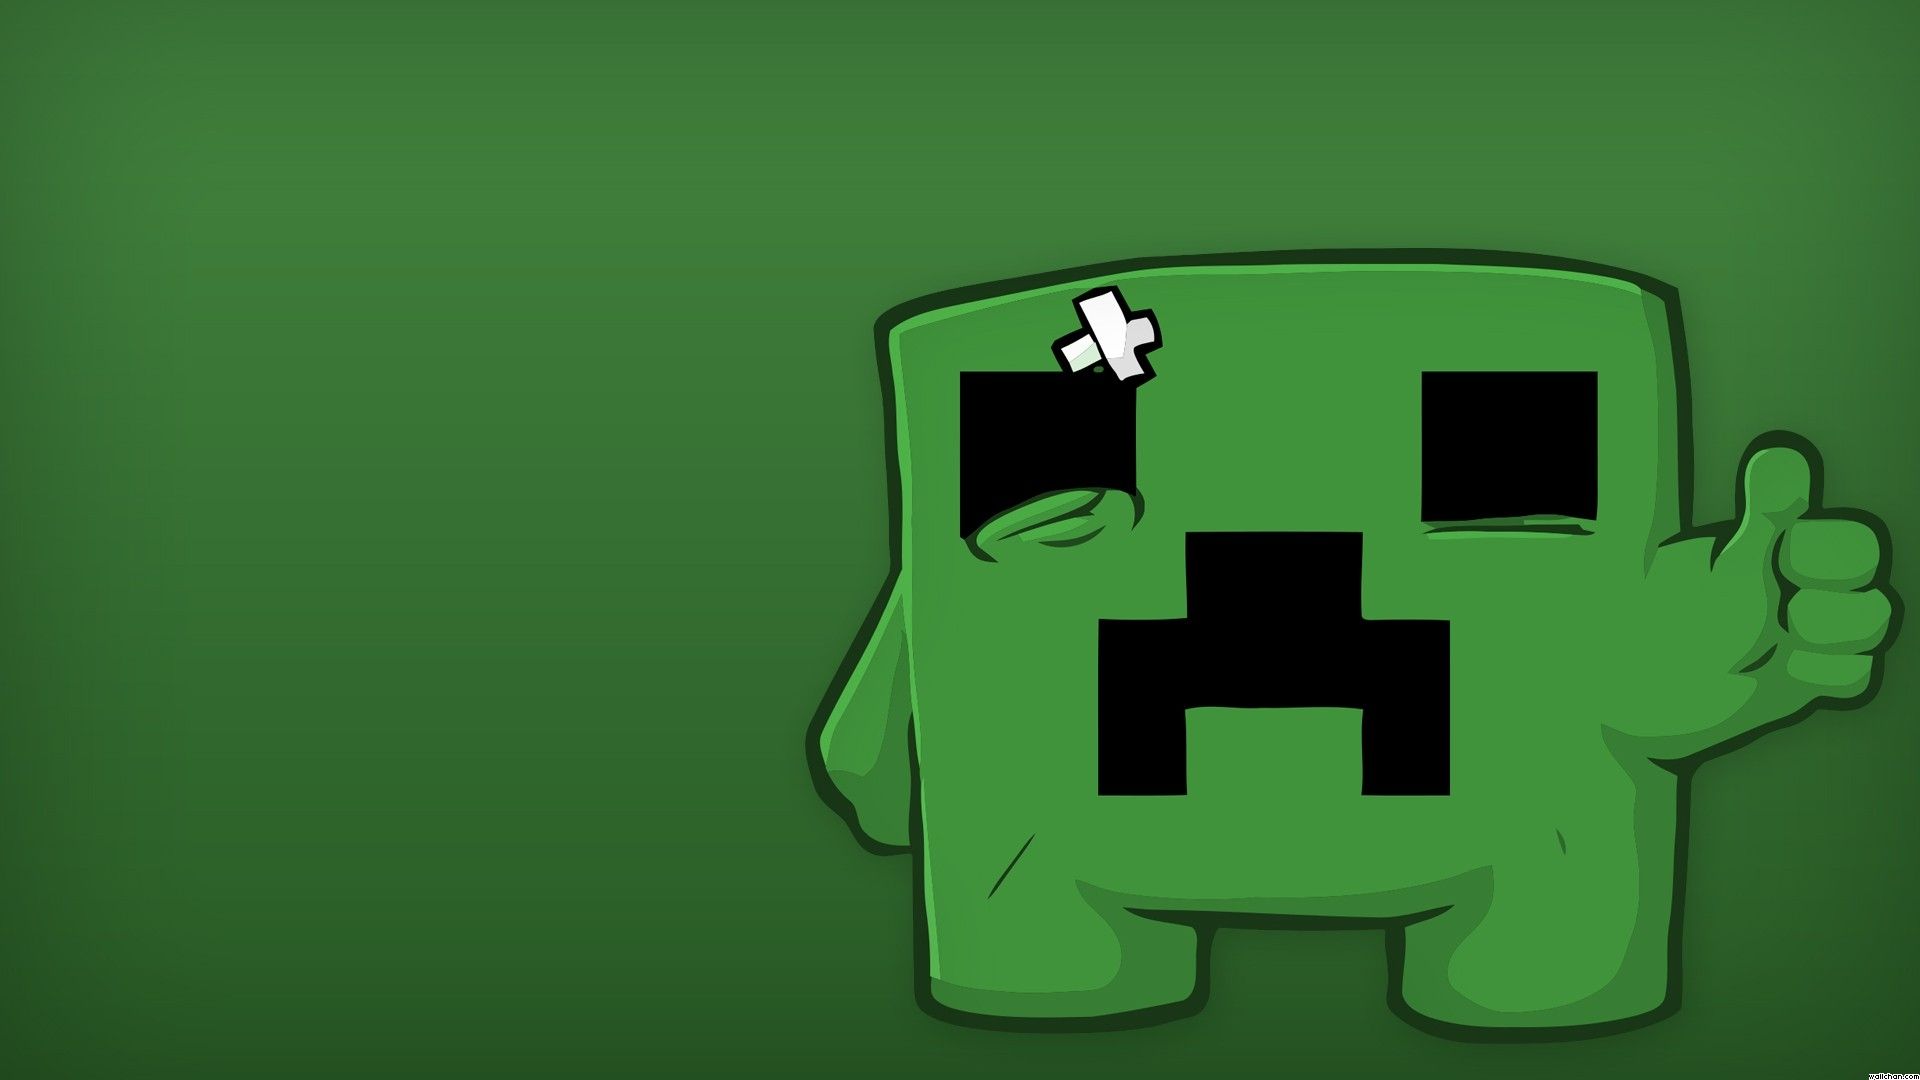 Super Meat Boy Creeper by Team Meat